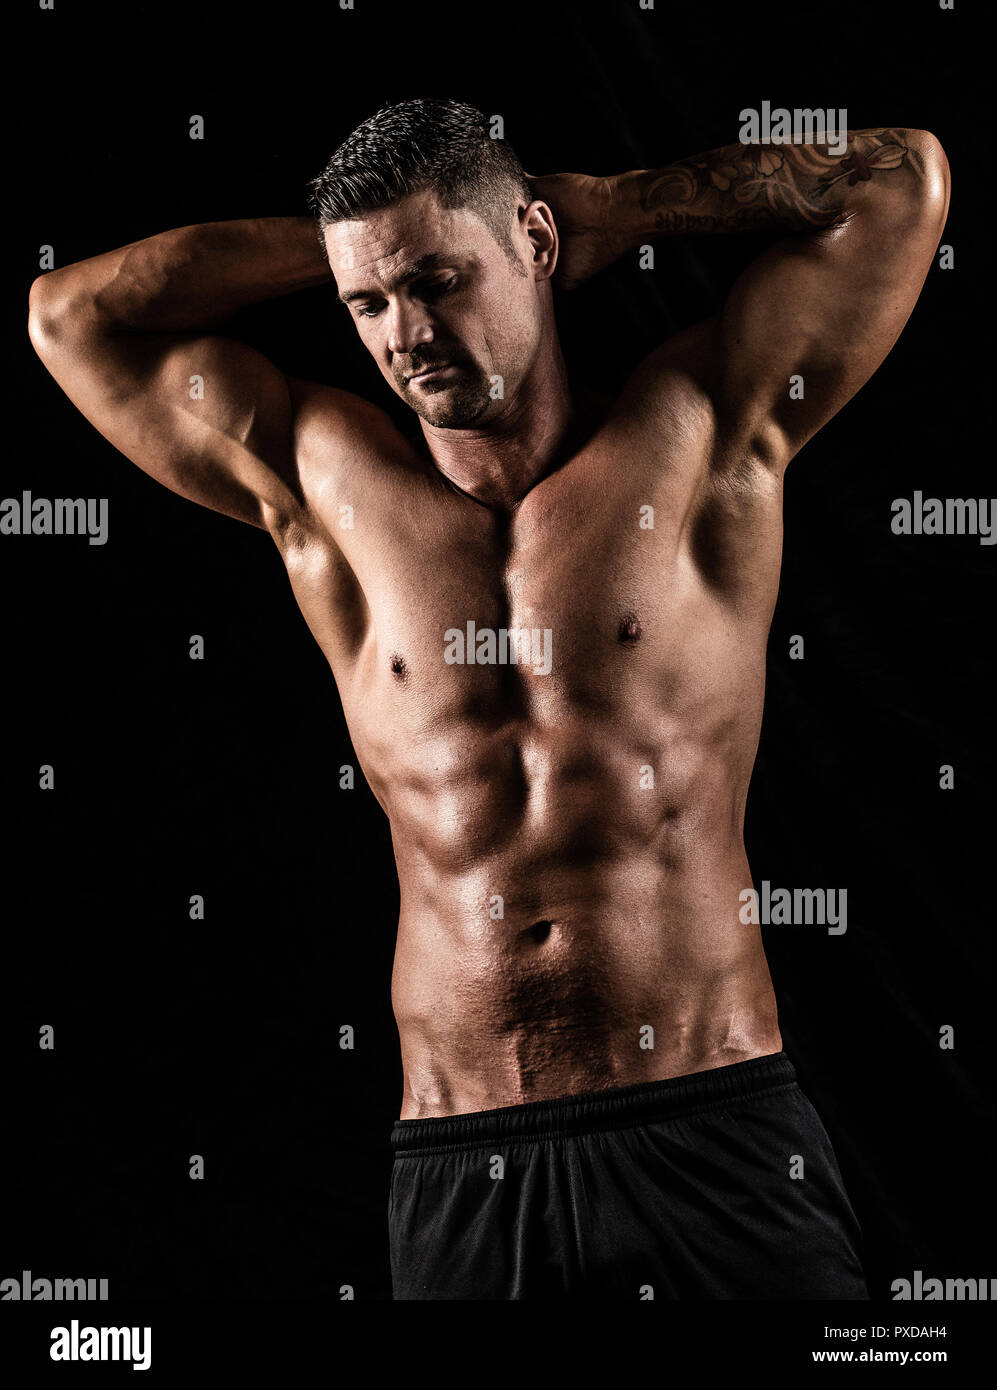 Male showing toned body after fitness workout at gym Stock Photo